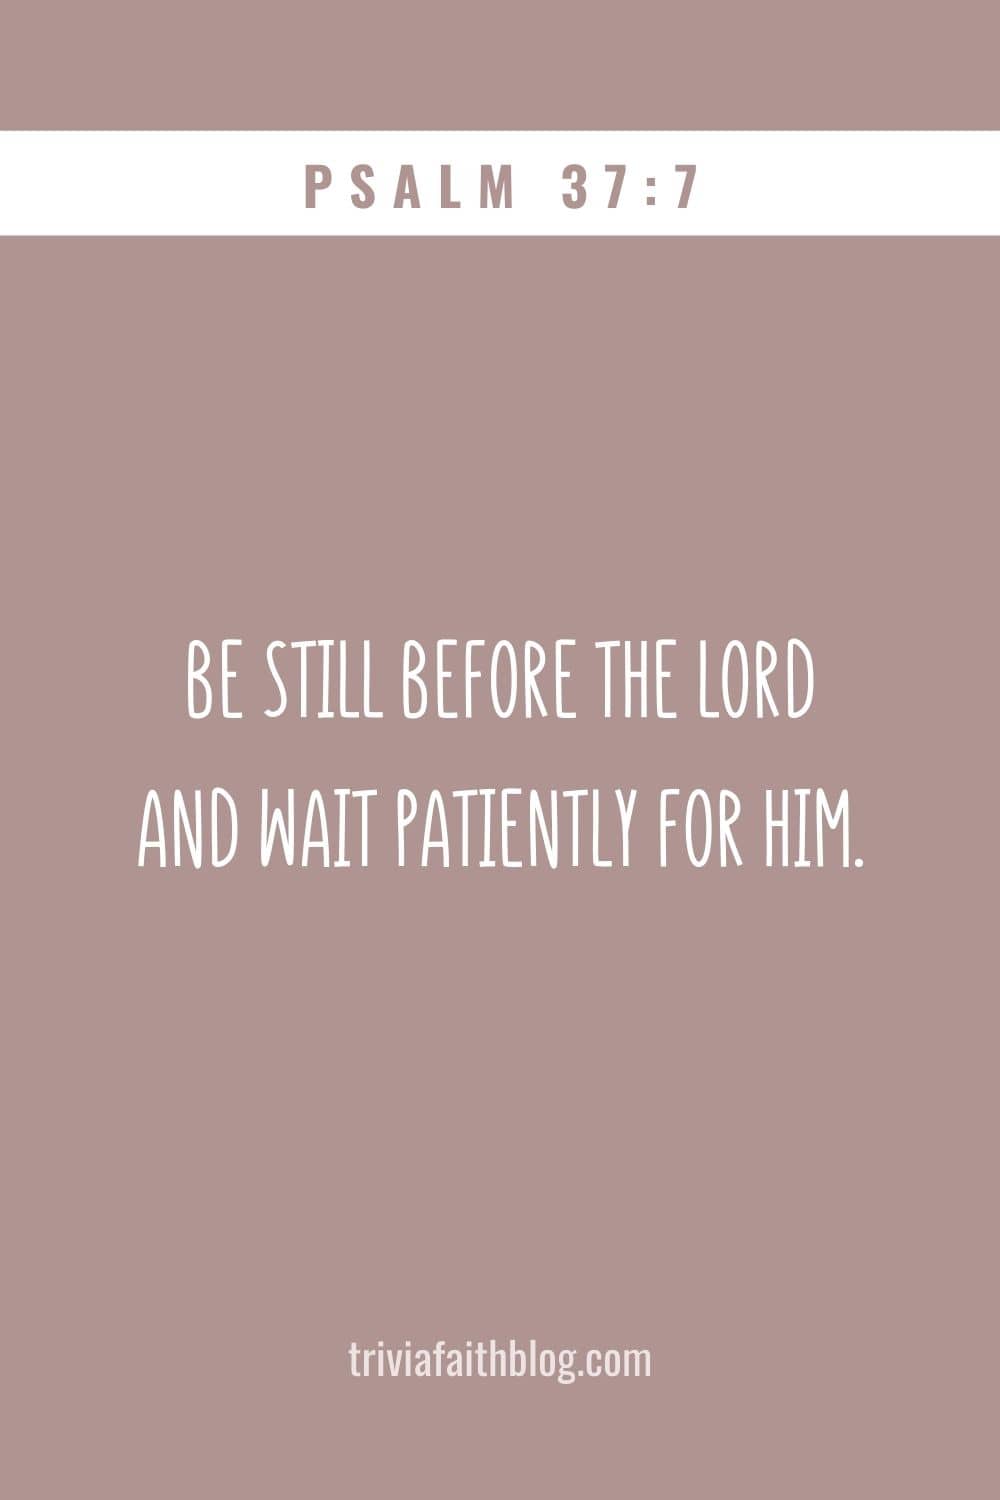 Be still before the Lord and wait patiently for him